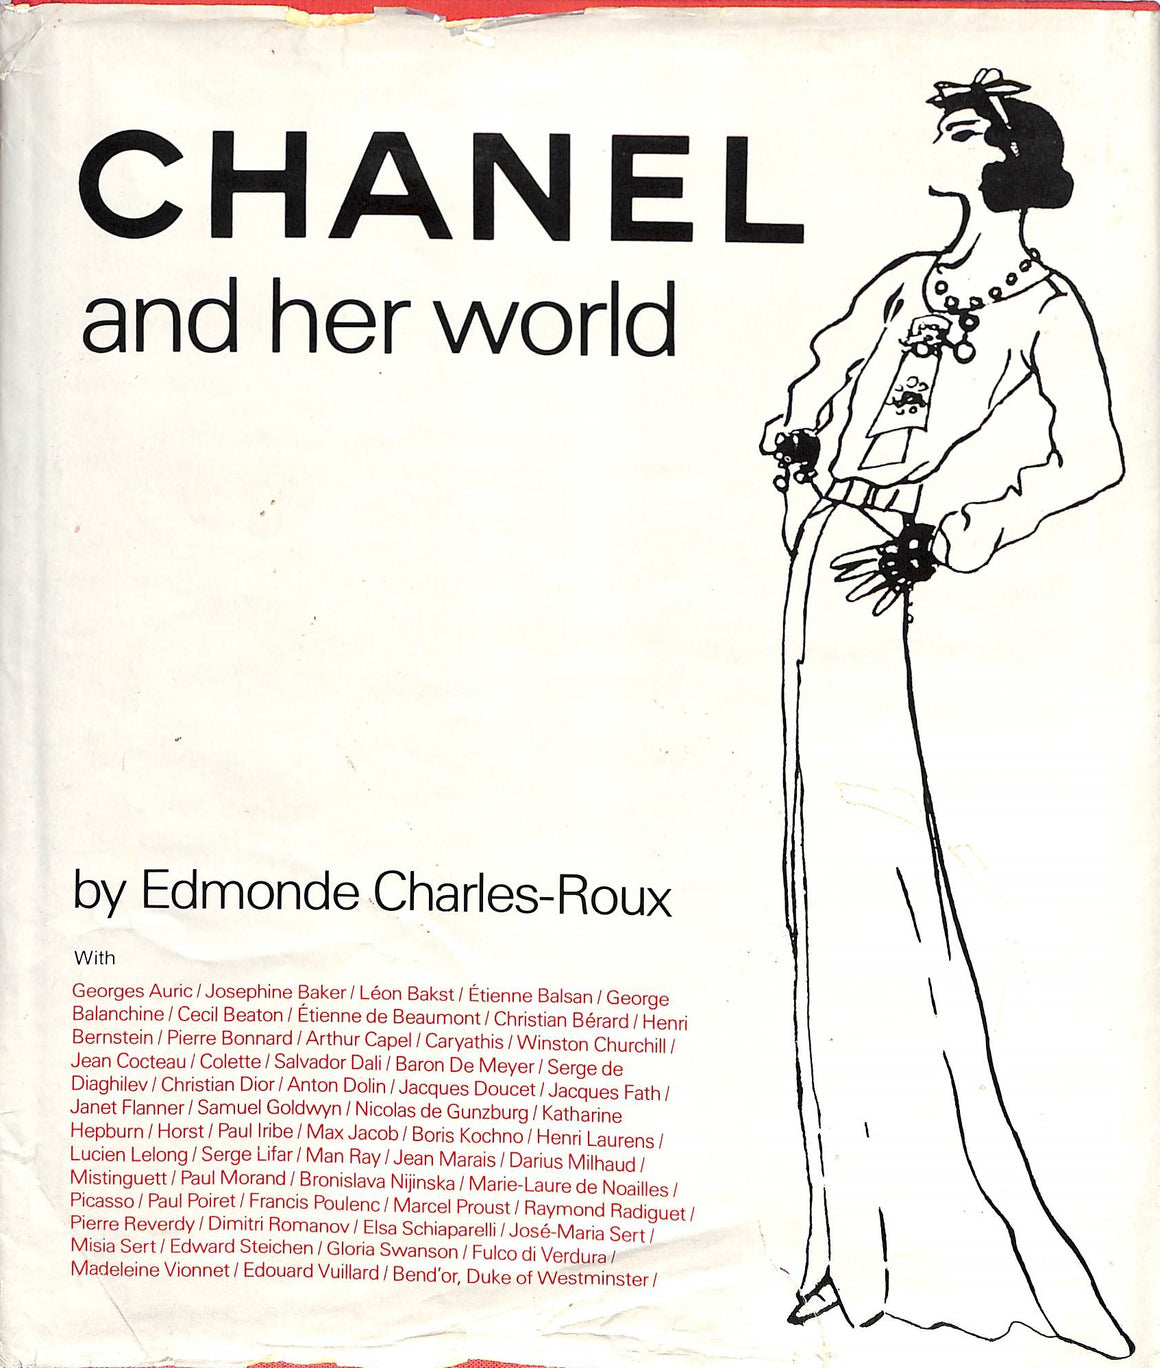 "Chanel and Her World" 1981 CHARLES-ROUX, Edmonde